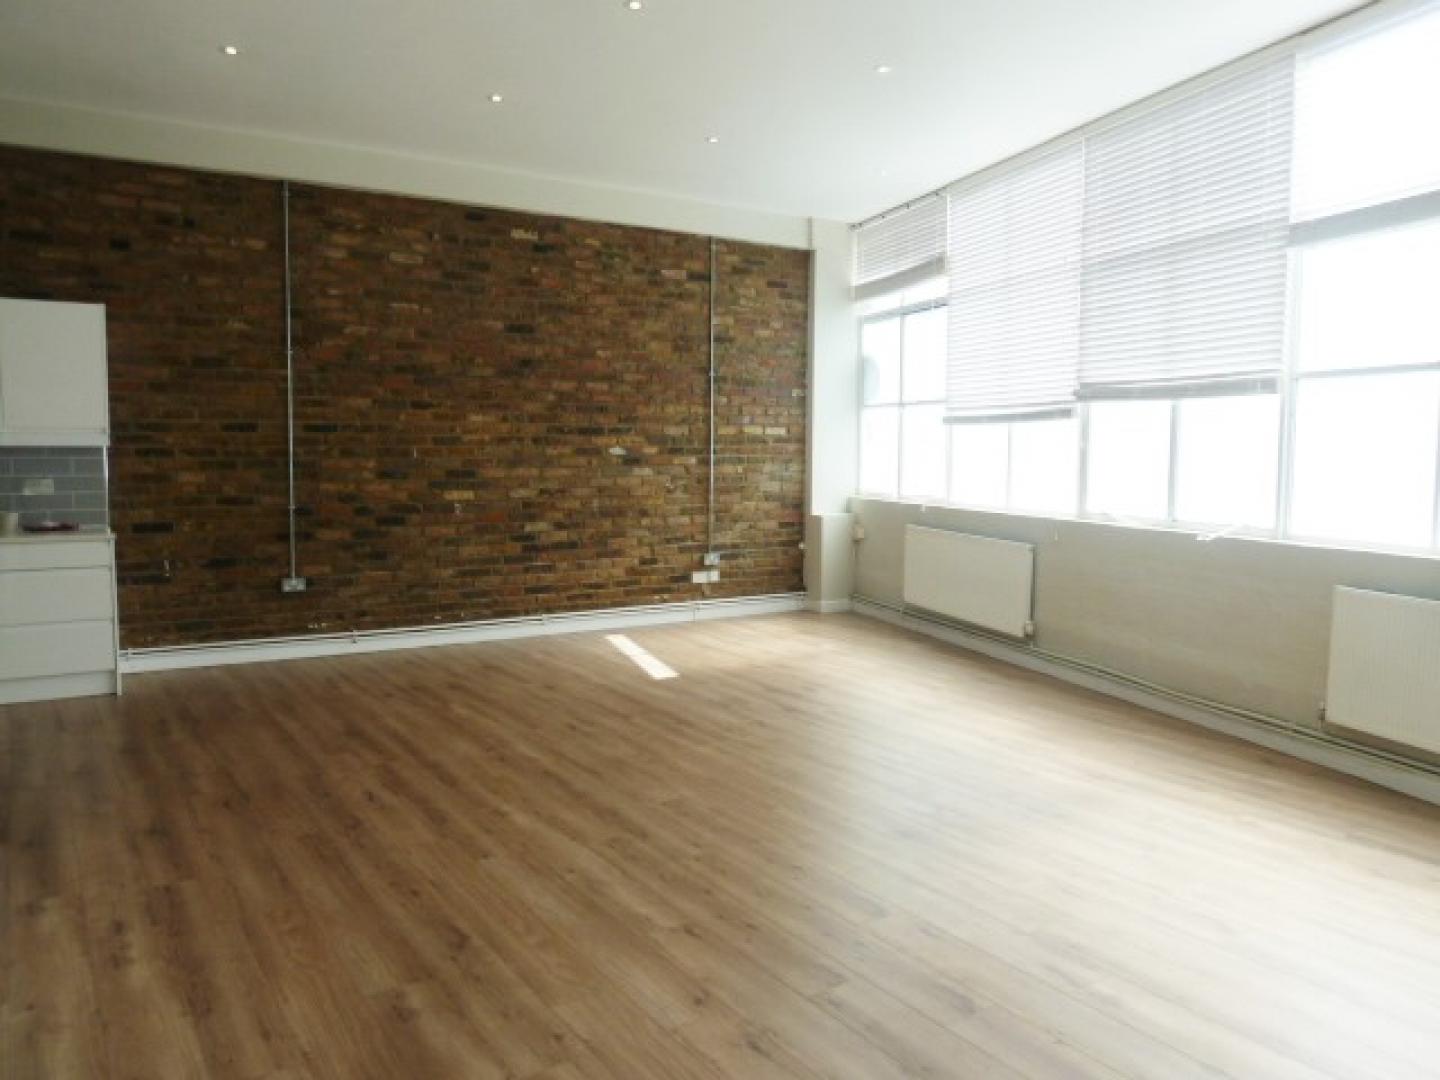 			WAREHOUSE CONVERSION IN ANGEL-OLD STREET-SHOREDITCH, 2 Bedroom, 1 bath, 1 reception Flat			 EAGLE HOUSE-EAGLE WHARF ROAD, ANGEL-OLD STREET-SHOREDITCH